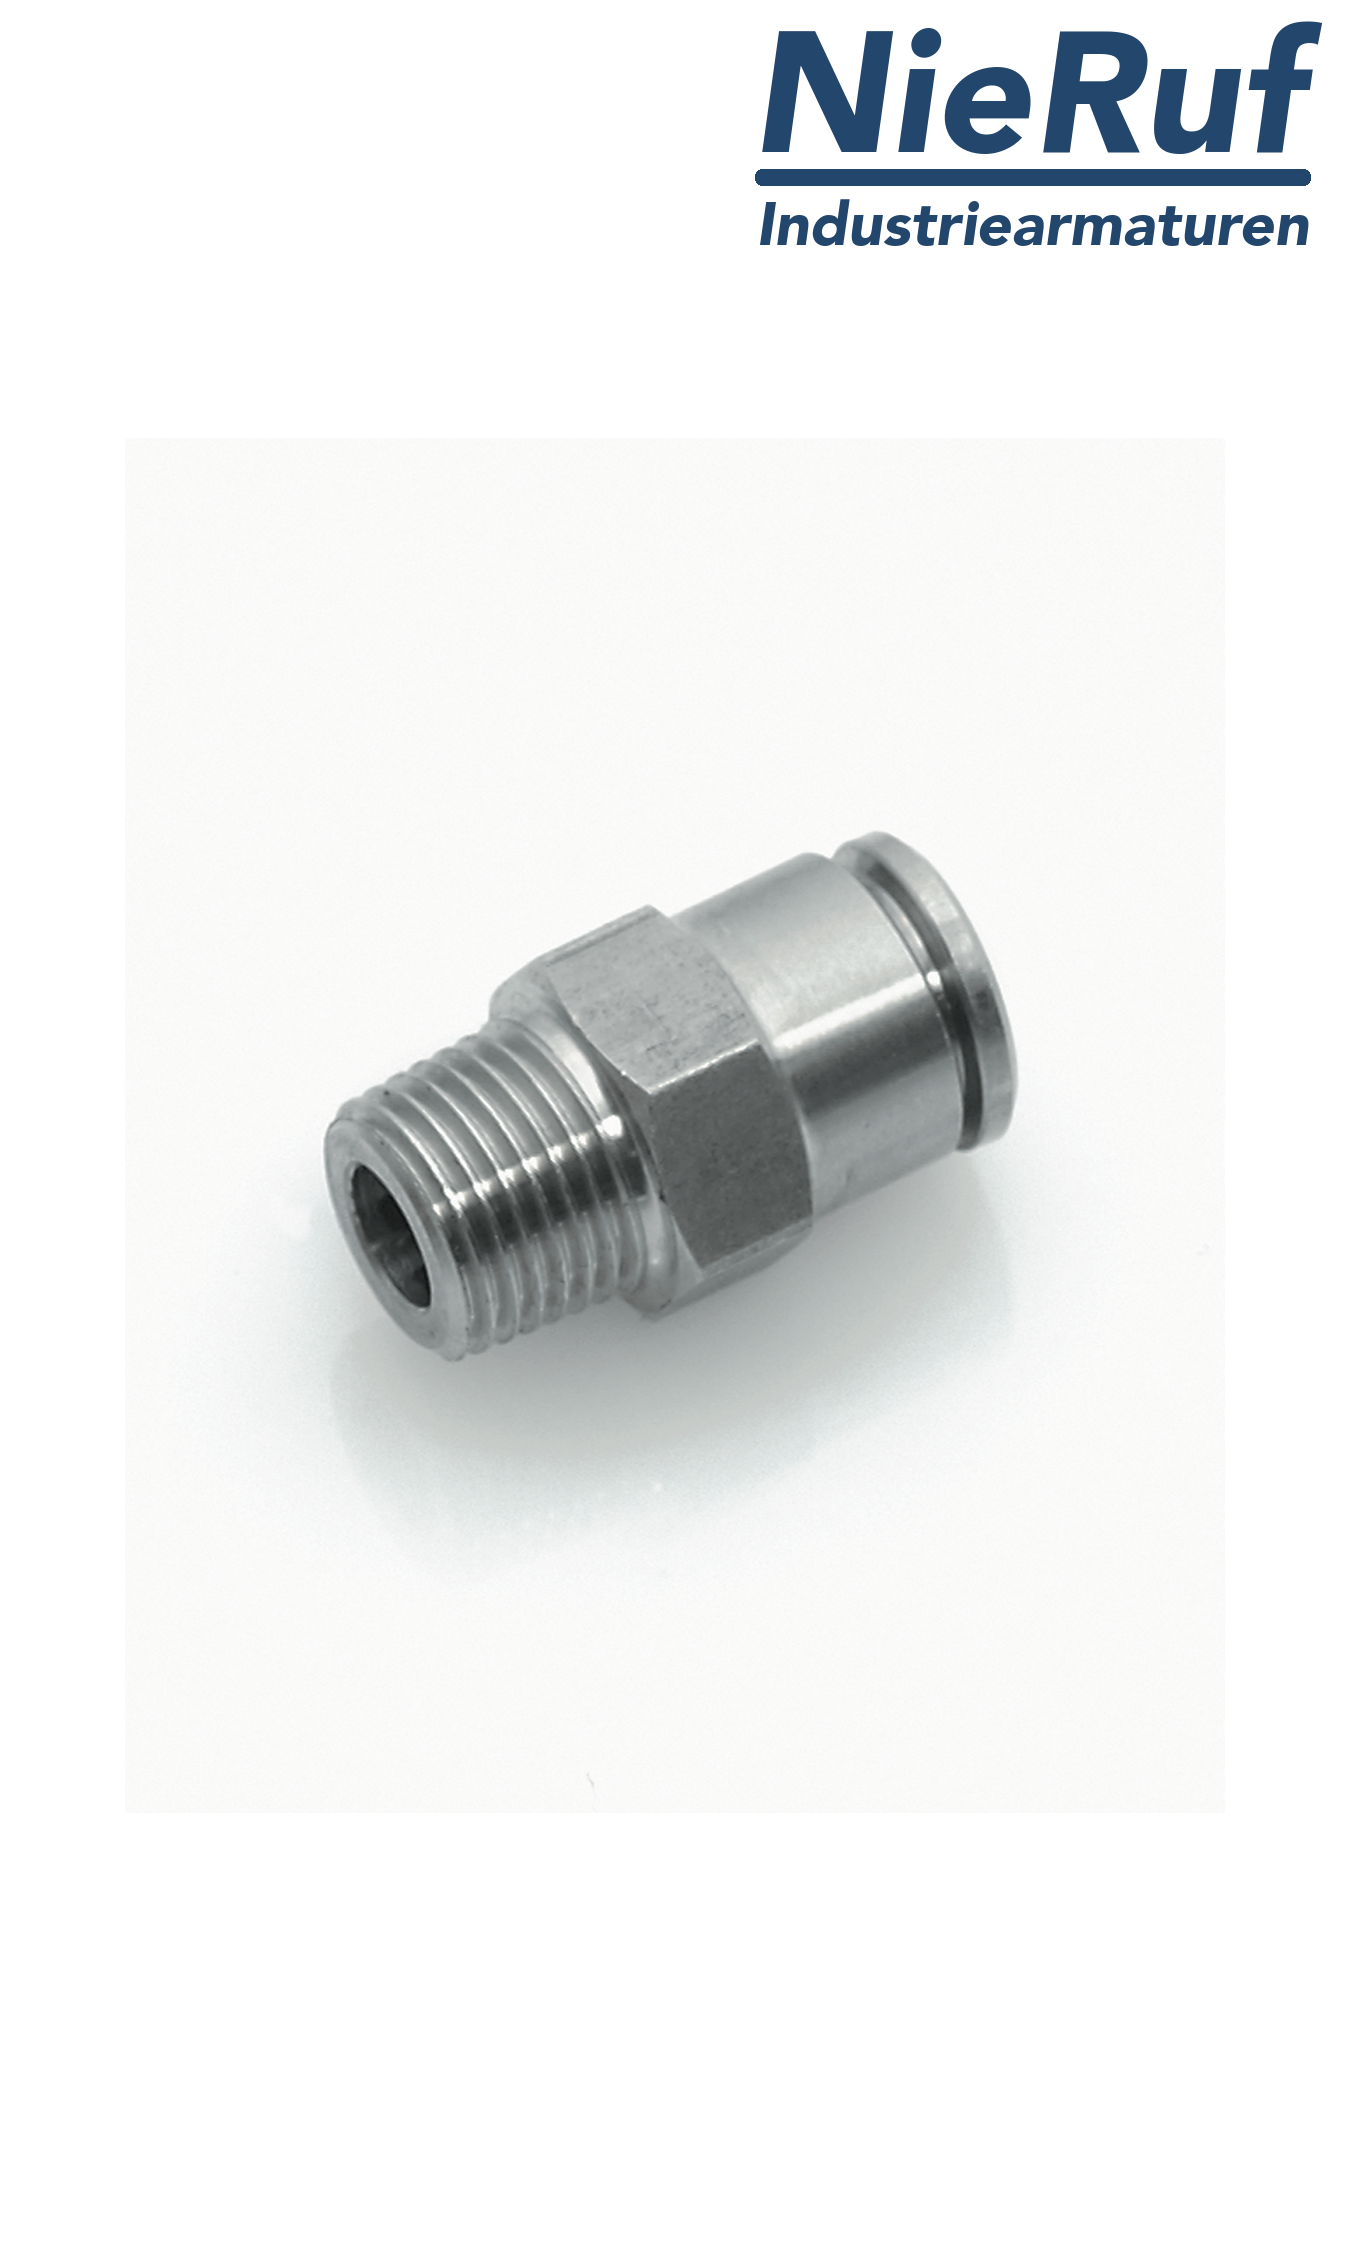 Straight male adaptor EF01 stainless steel FKM R1/4" D4mm